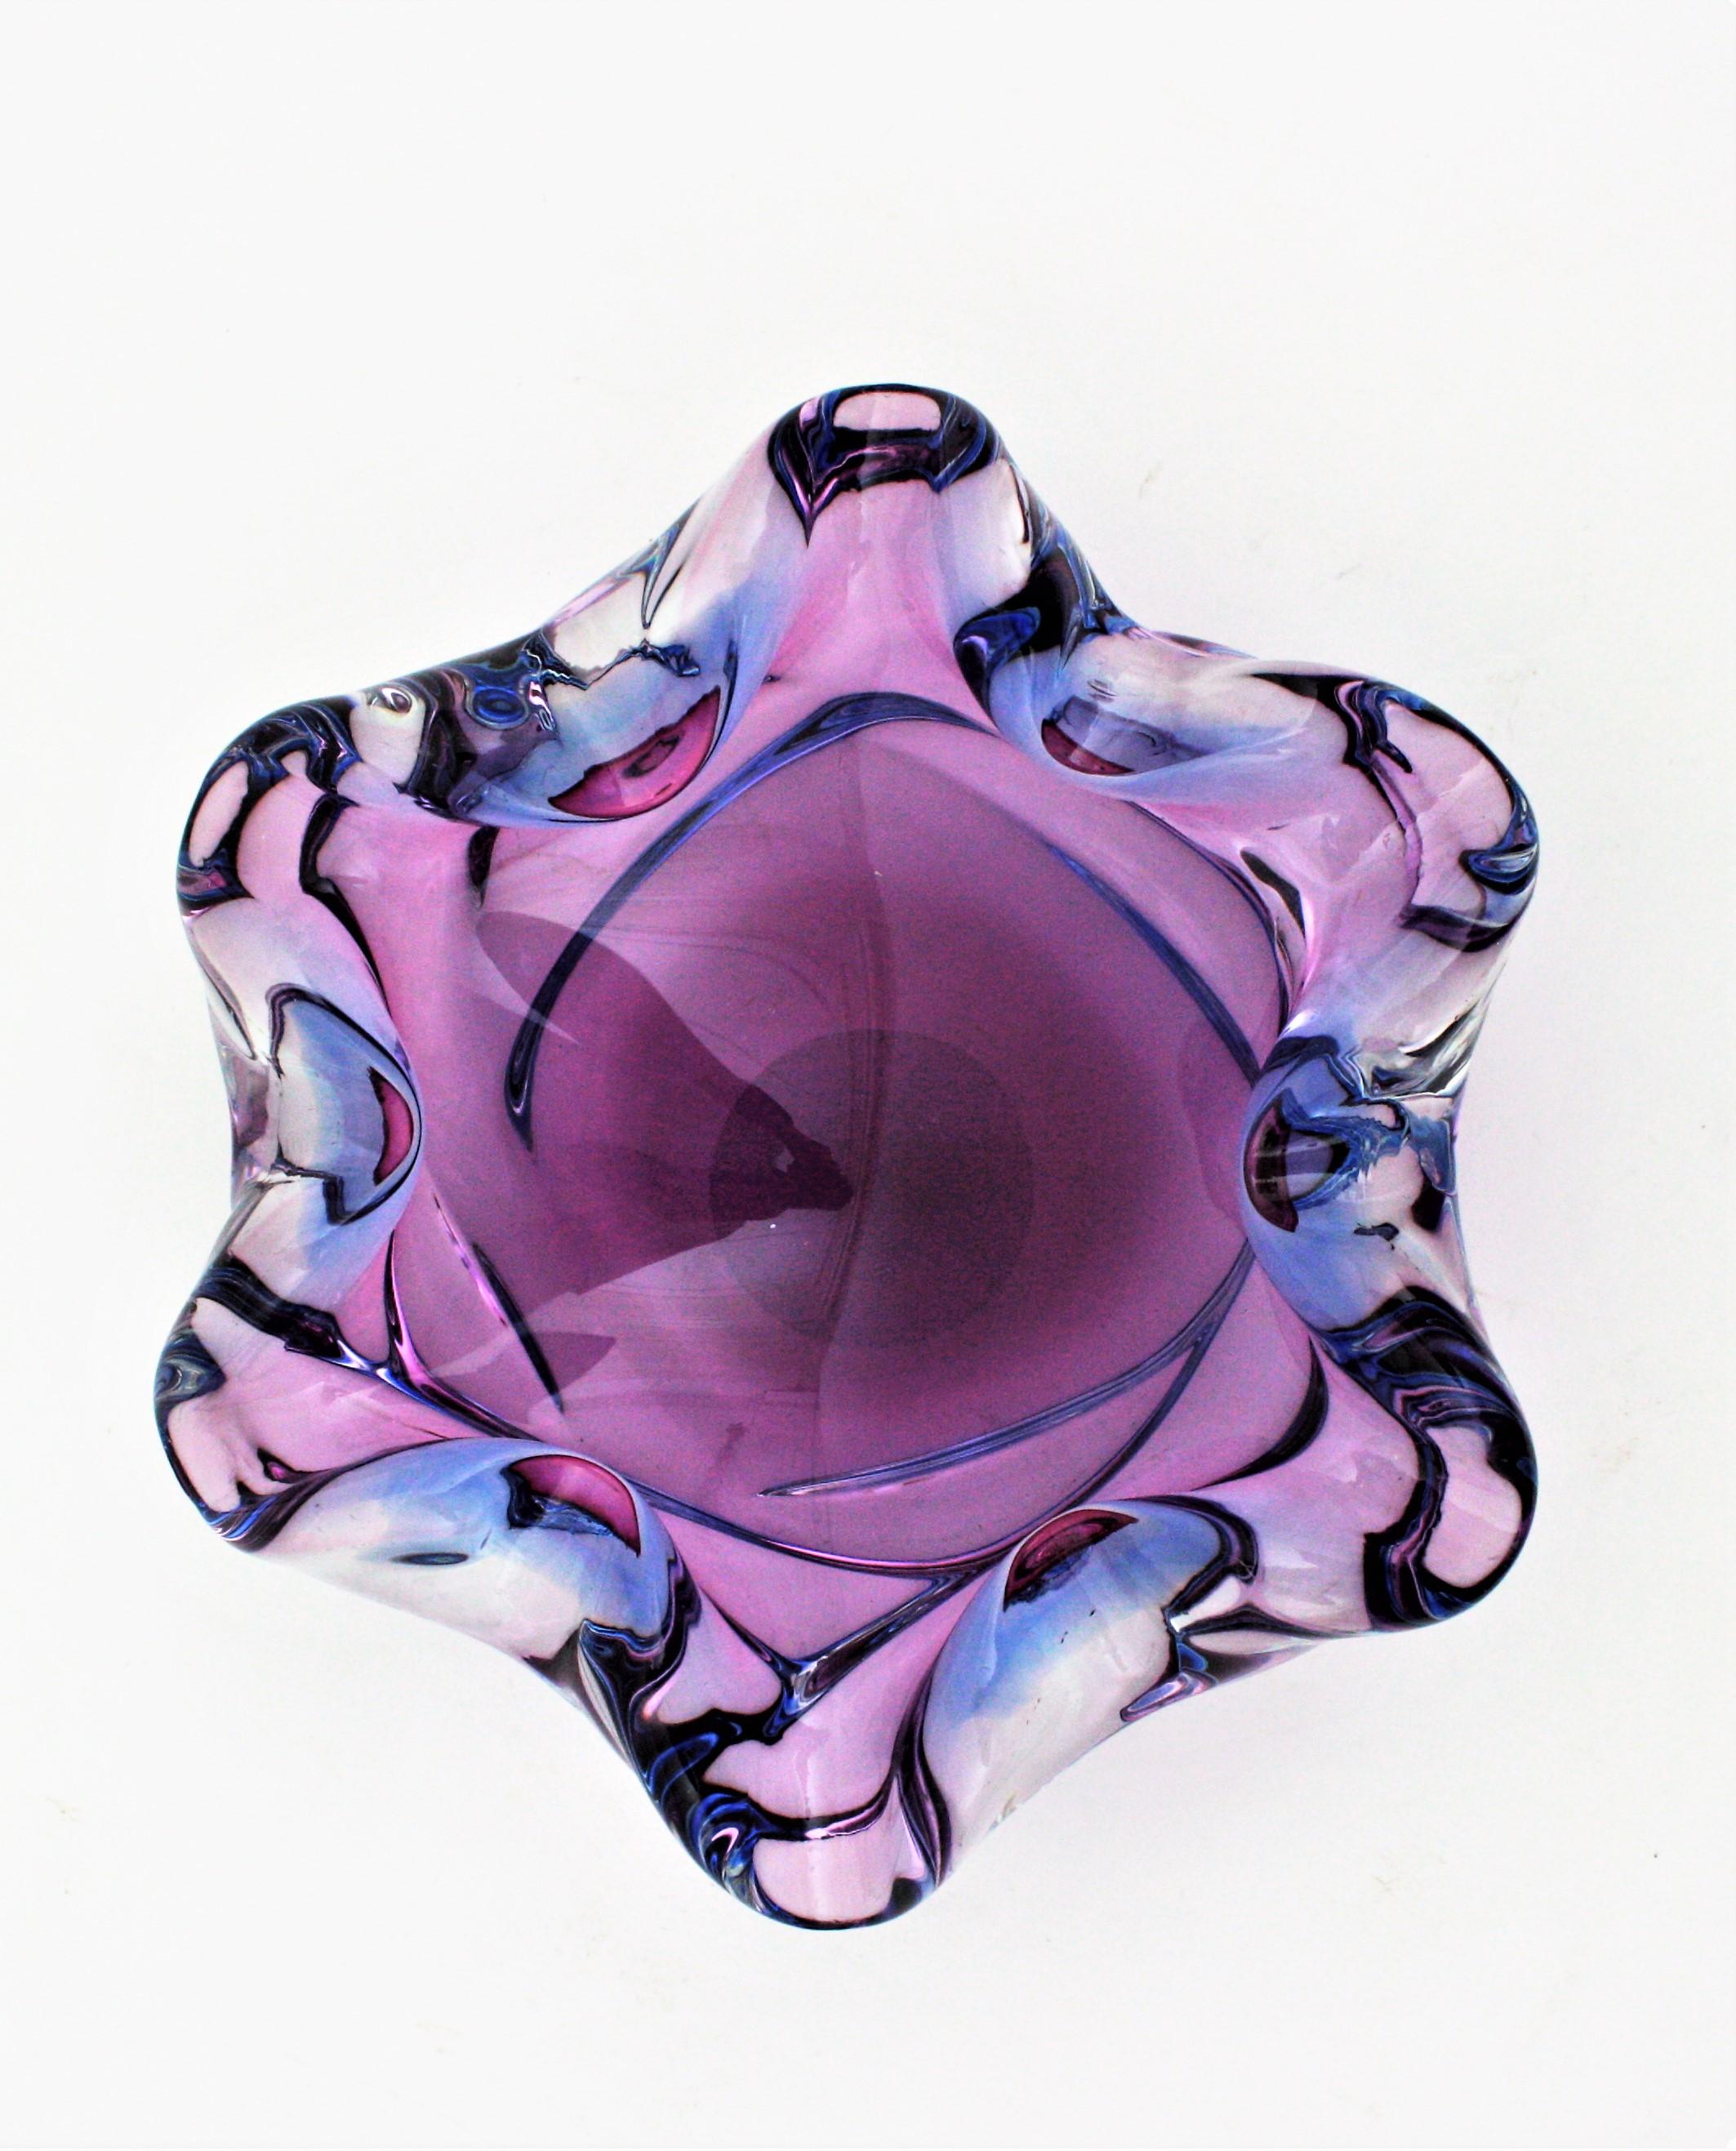 Seguso Murano Pink Purple Sommerso Art Glass Bowl or Ashtray, Italy, 1960s For Sale 2